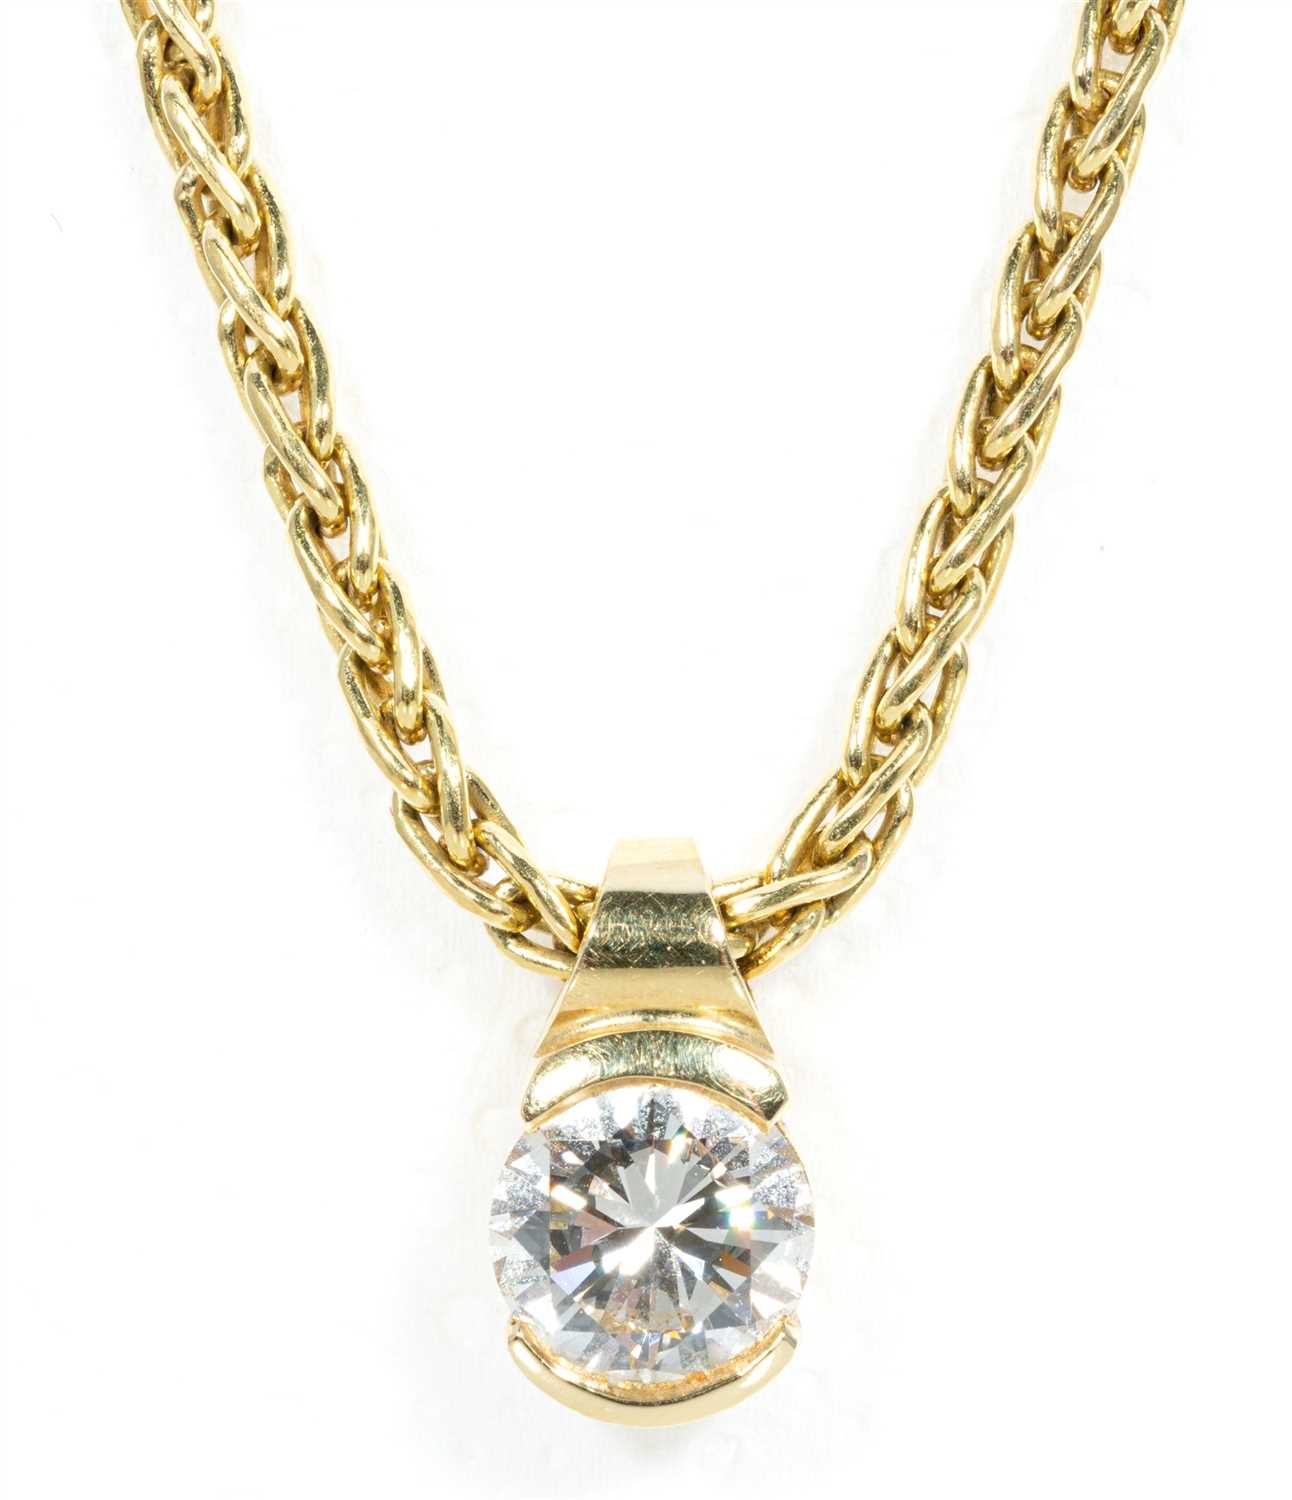 Lot 214 - A diamond solitaire pendant and chain.